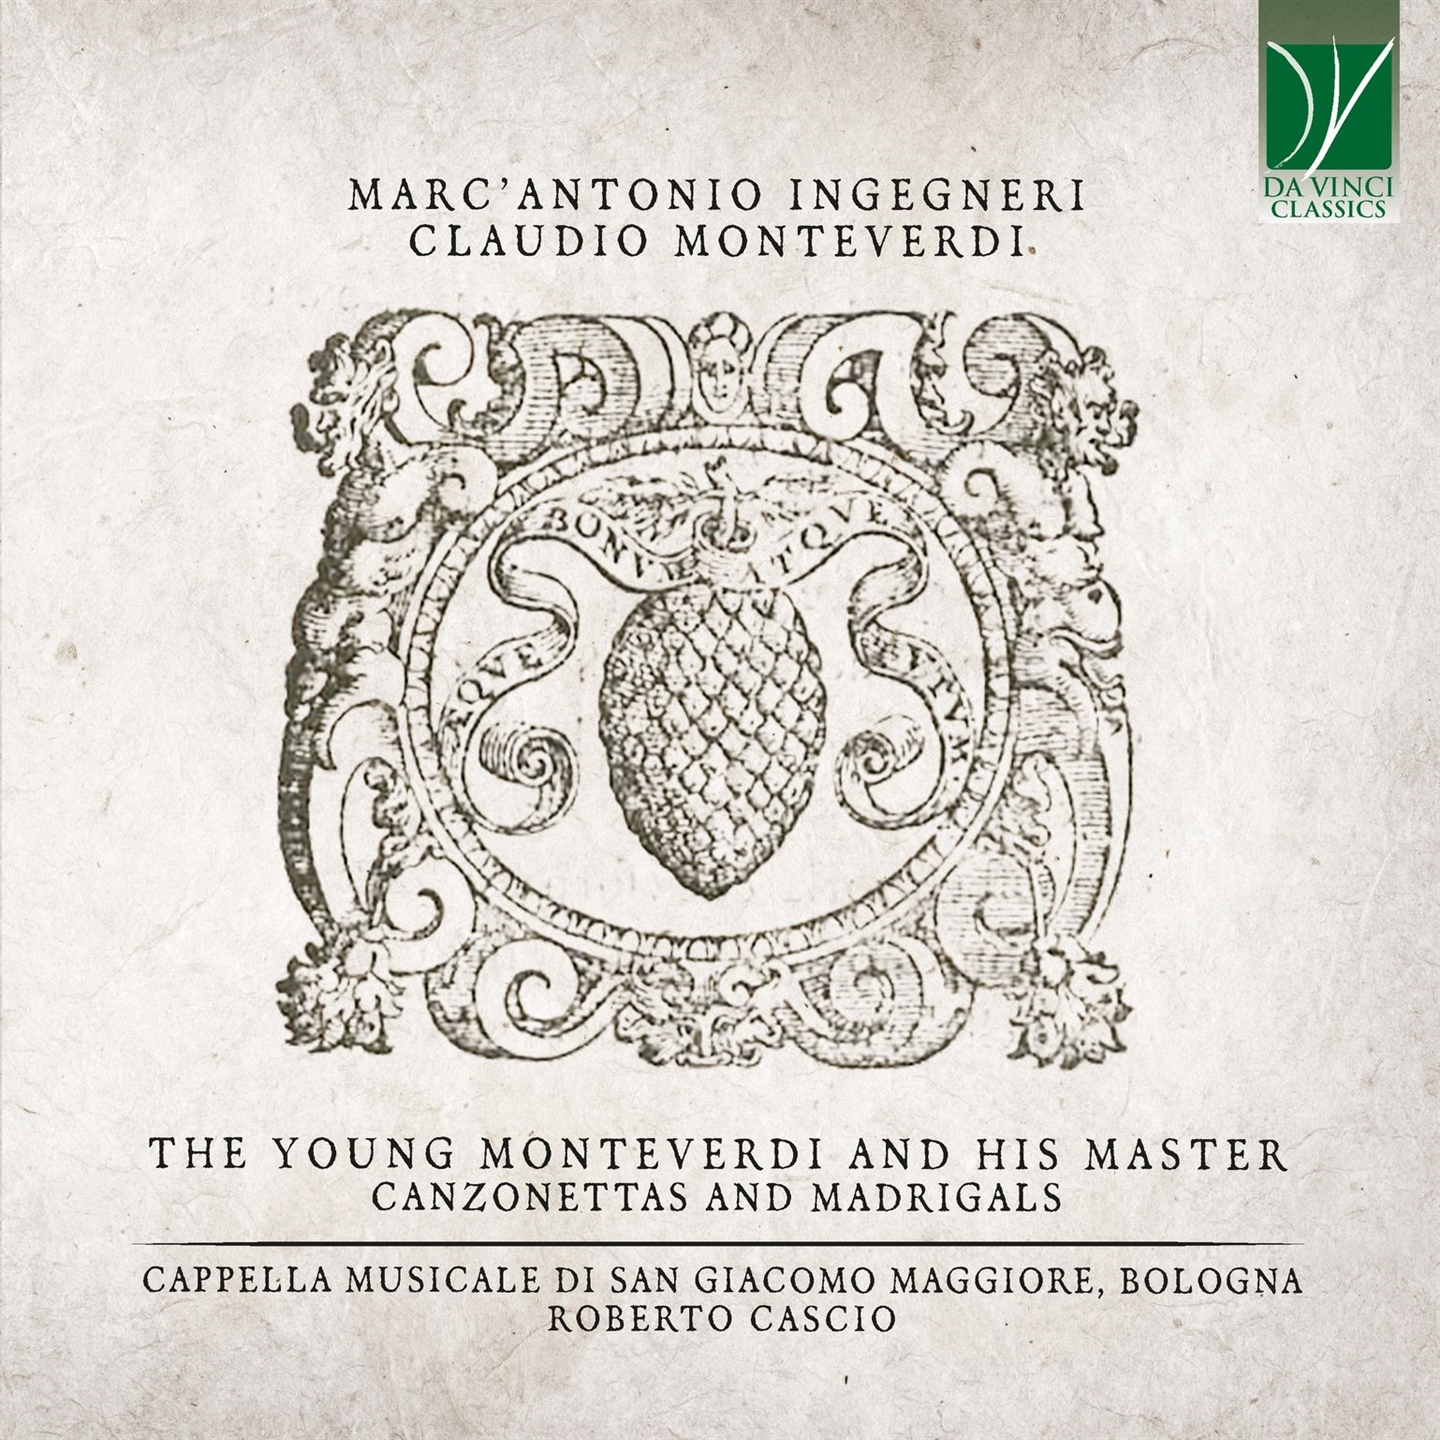 THE YOUNG MONTEVERDI AND HIS MASTER - CANZONETTAS AND MADRIGALS